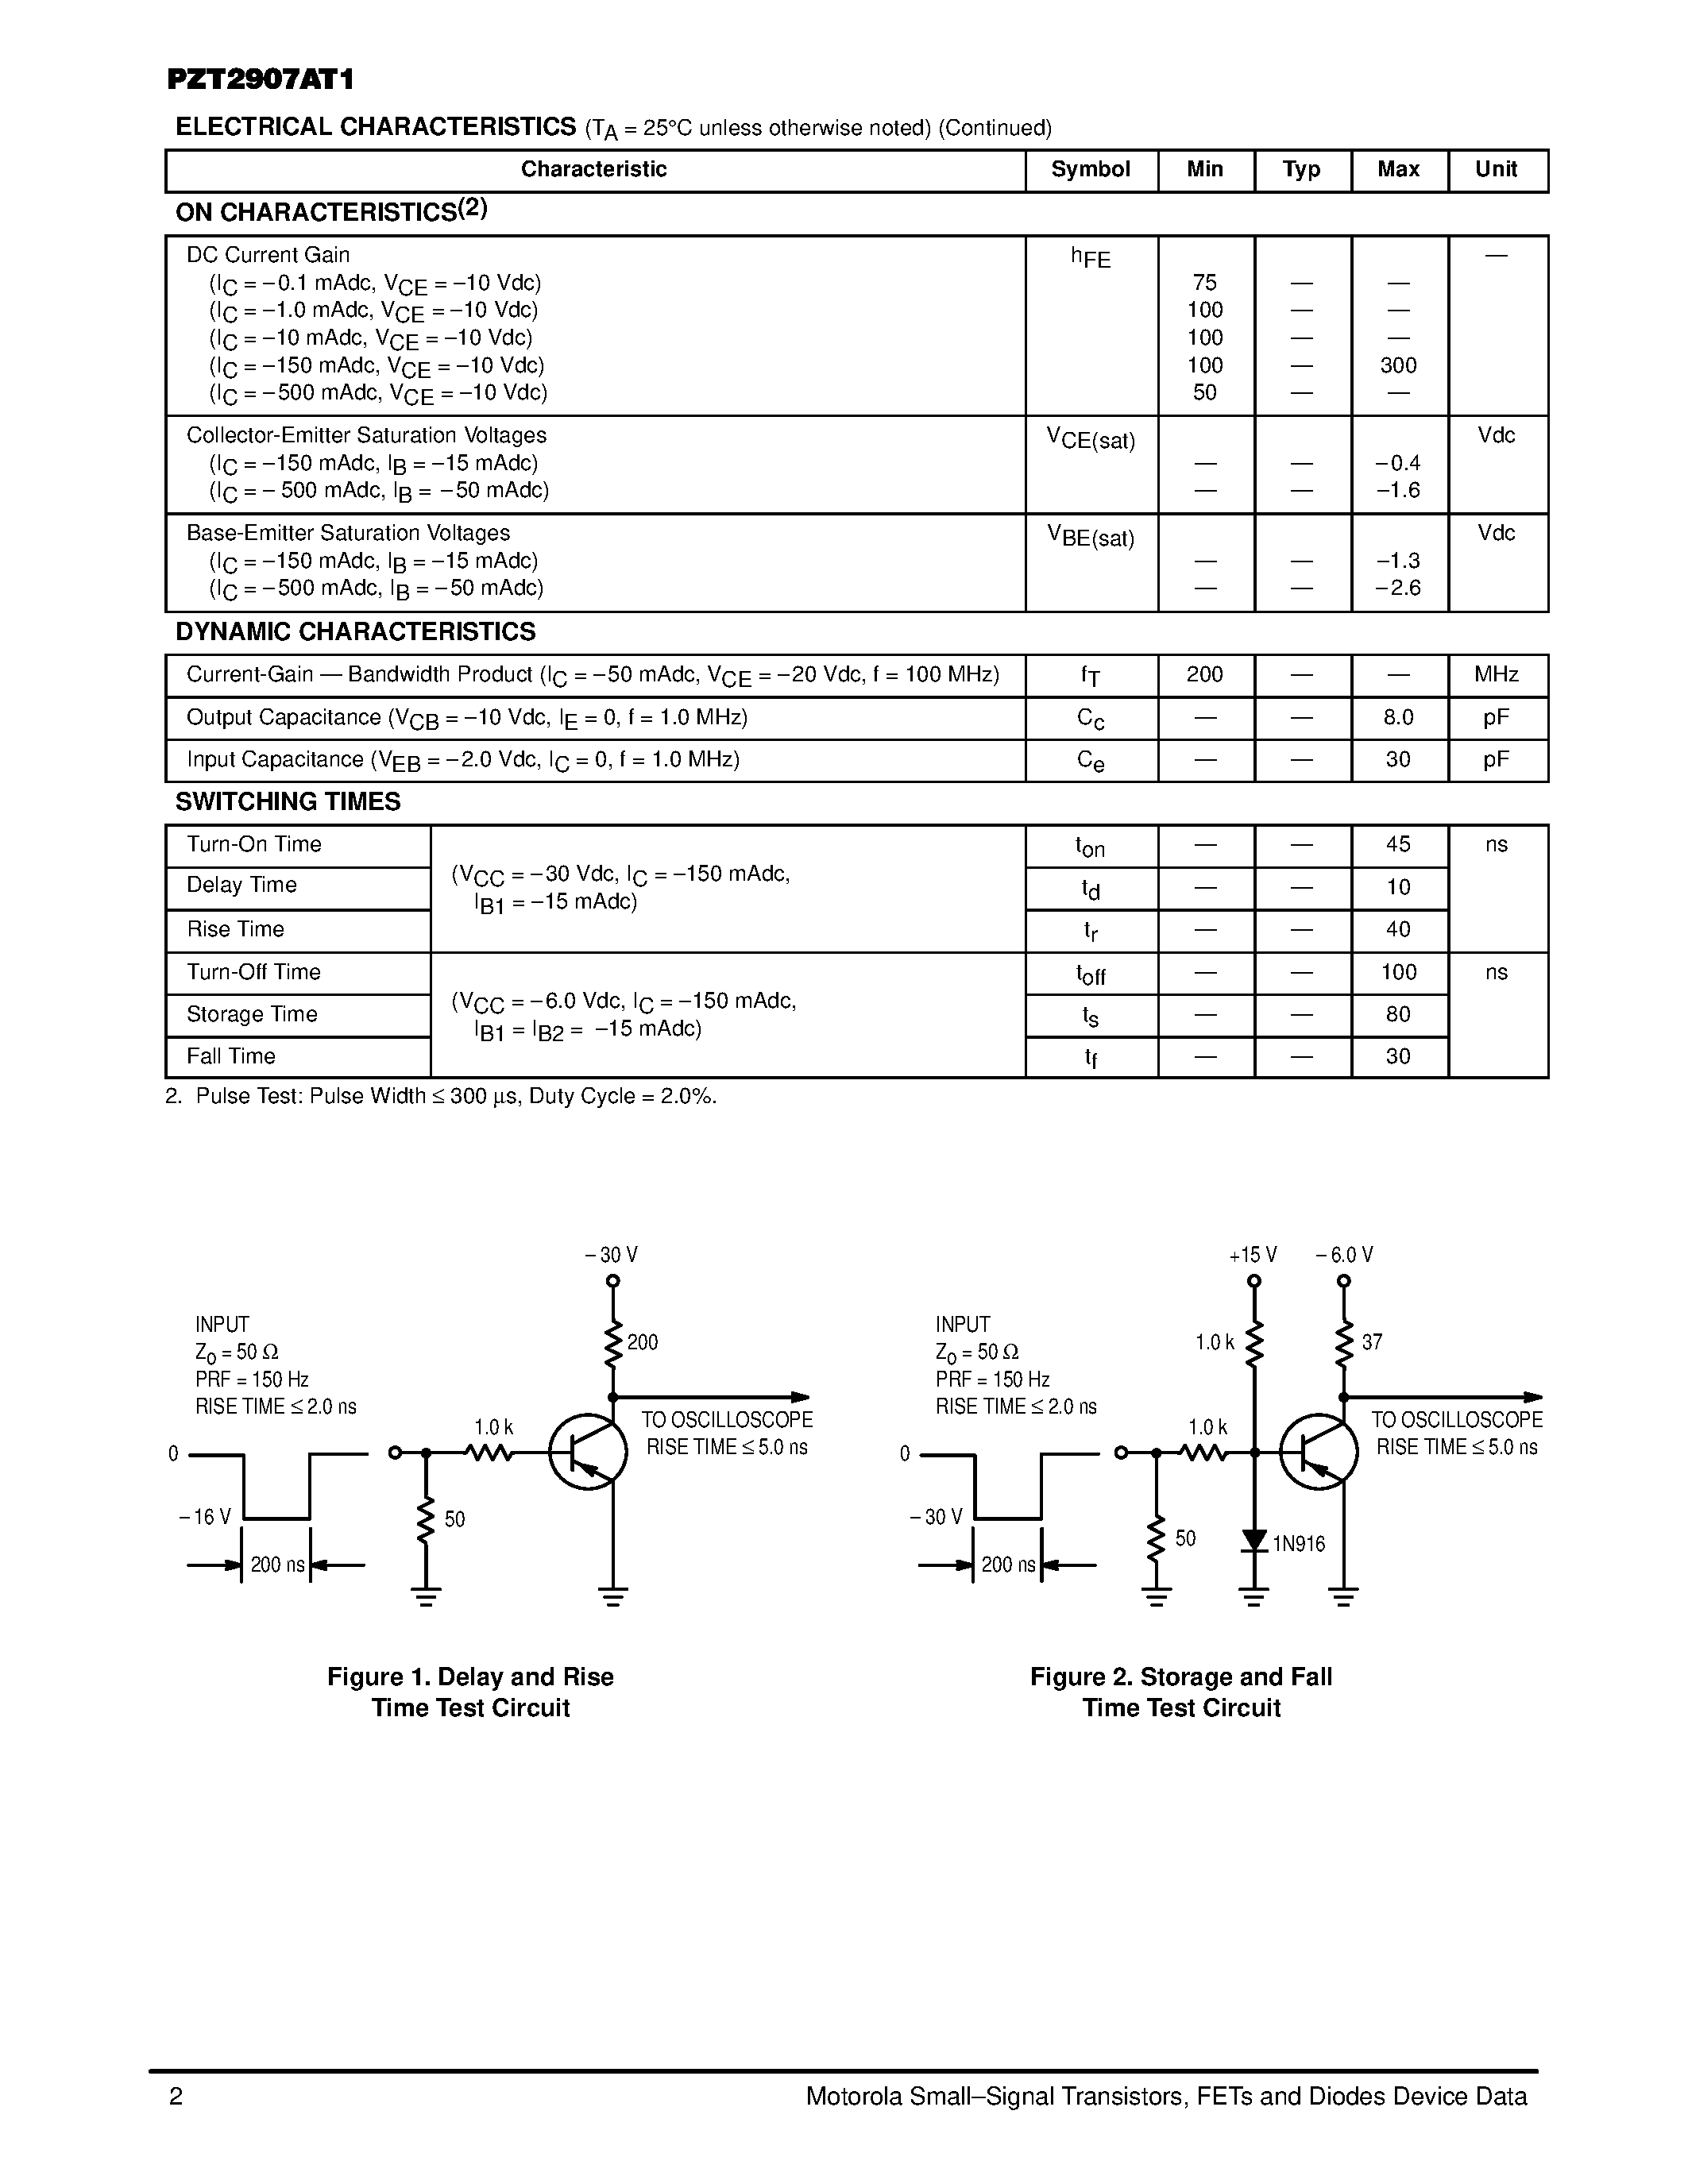 Datasheet PZT2907A - PNP SILICON TRANSISTOR SURFACE MOUNT page 2